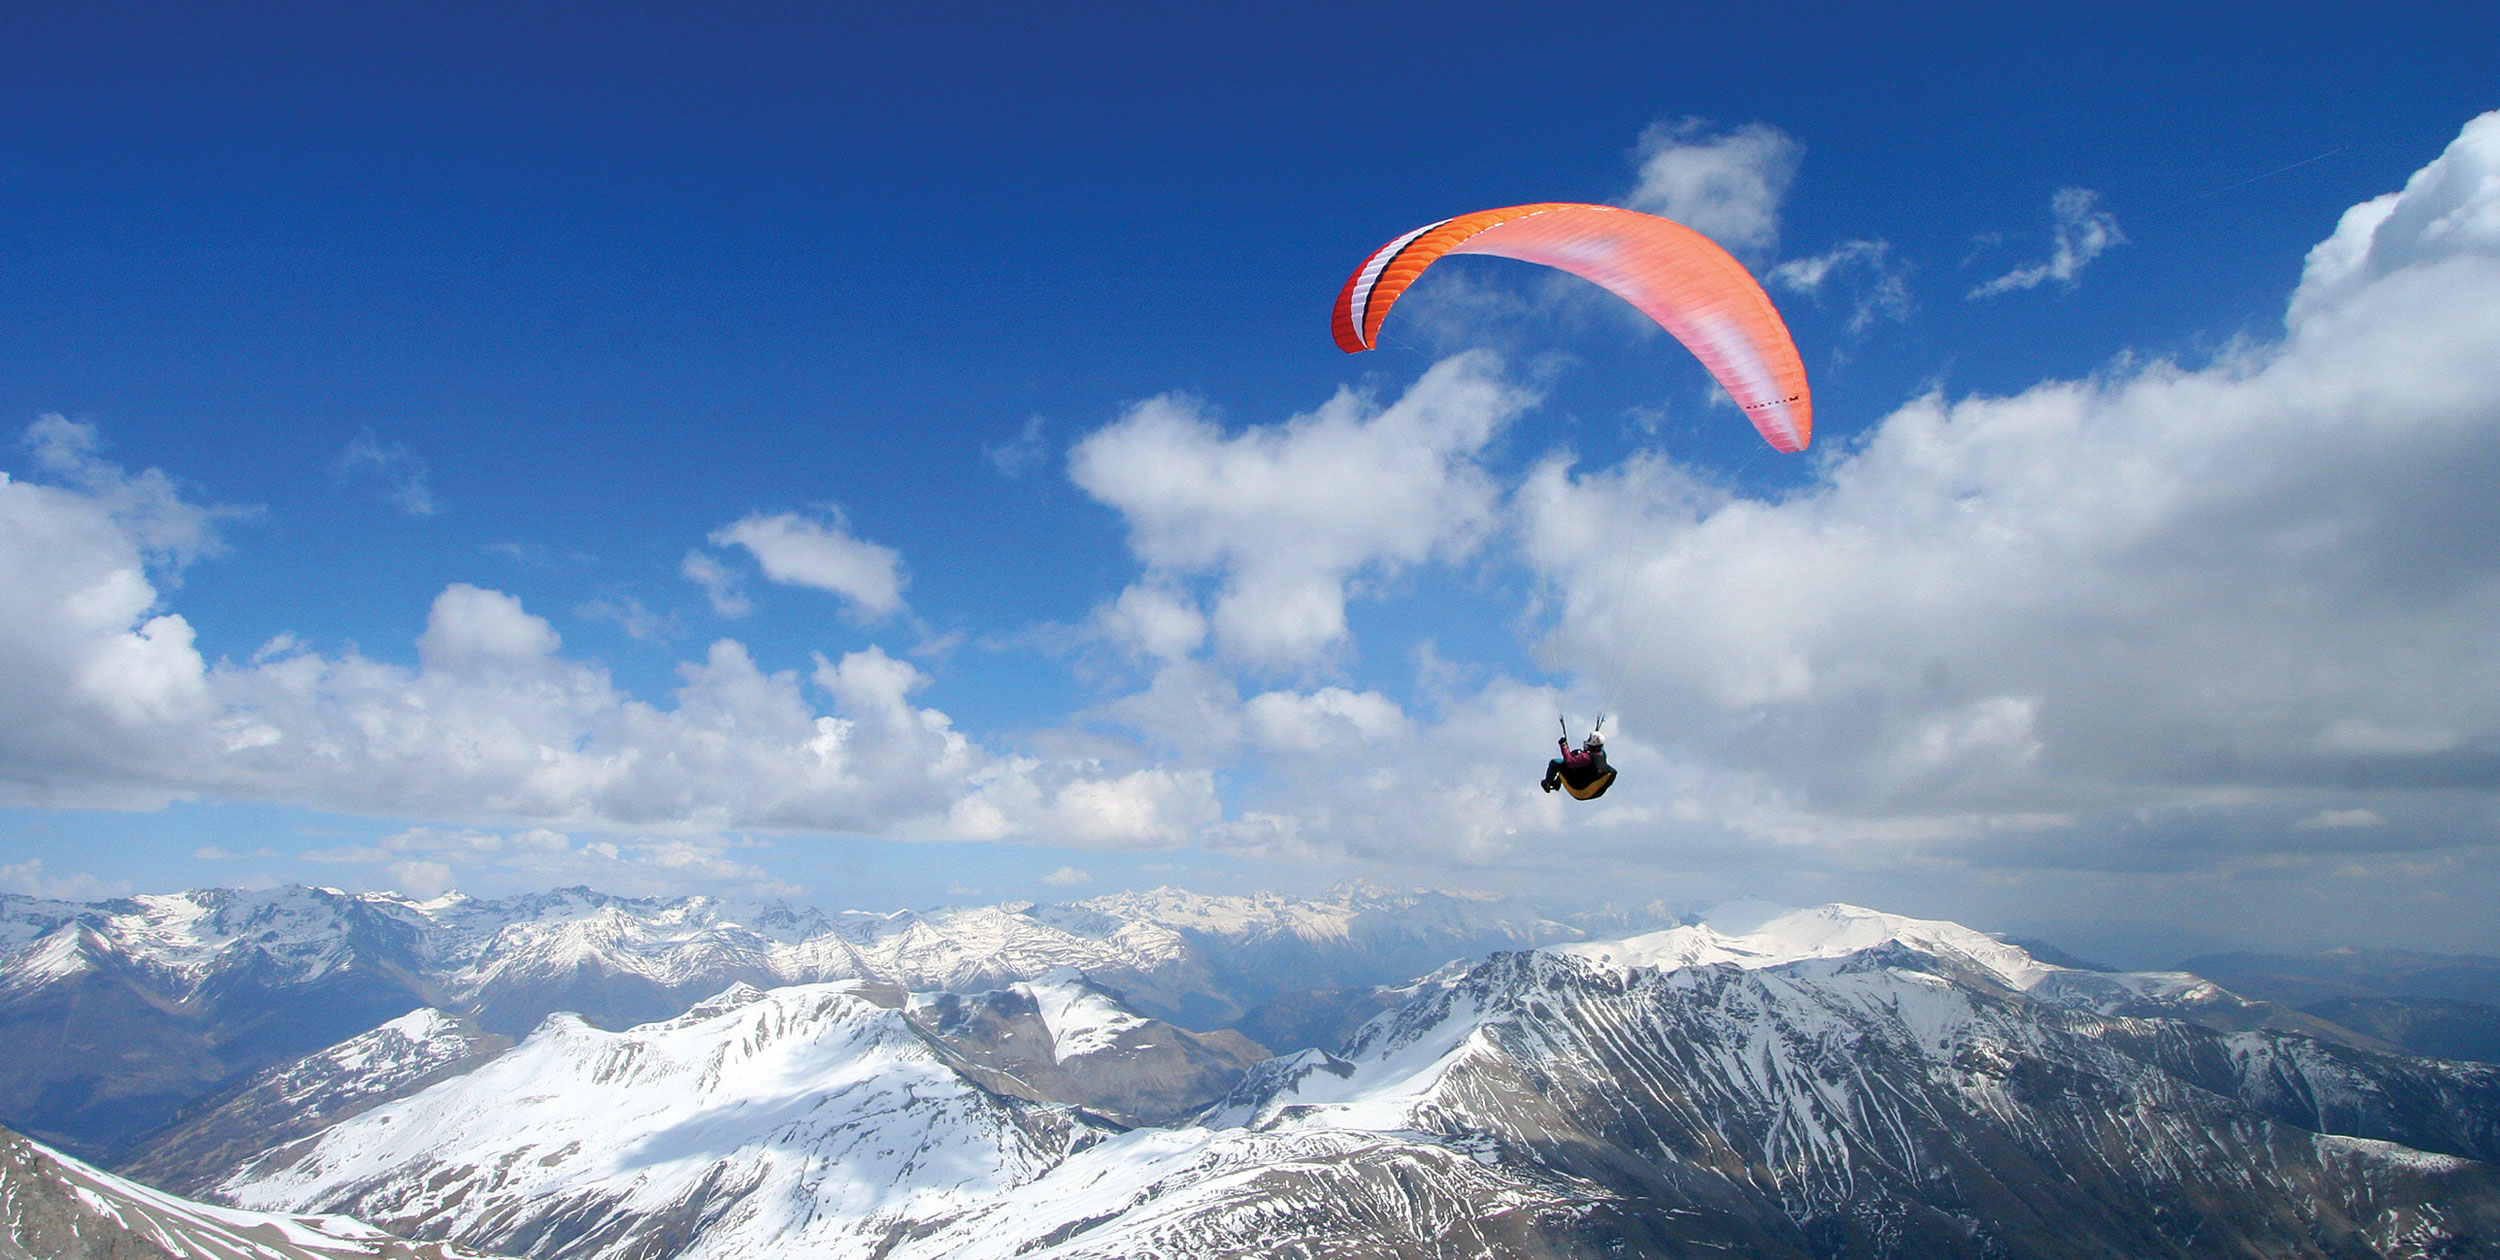 Spring paragliding in mountains